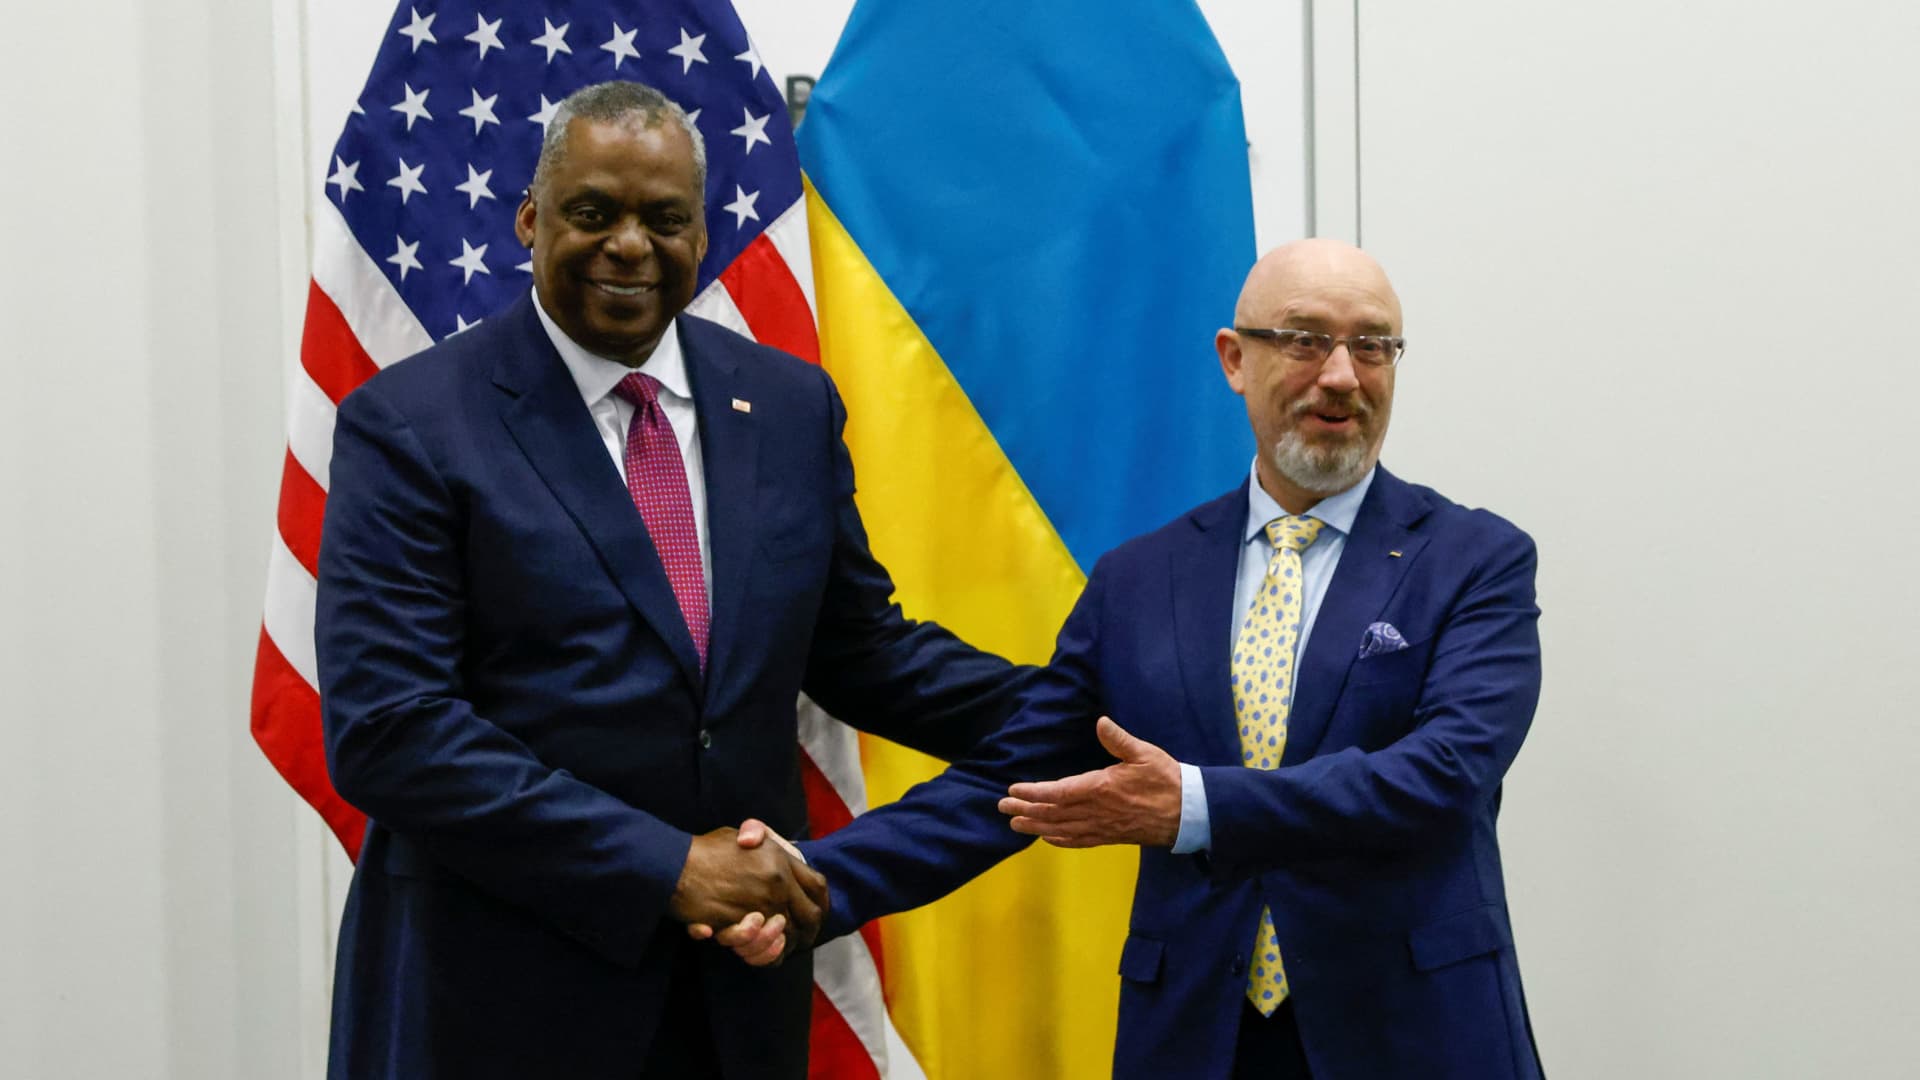 U.S. Defense Secretary Lloyd Austin shakes hands with Ukraine's Defence Minister Oleksii Reznikov ahead of a NATO defence ministers' meeting at the alliance's headquarters in Brussels, Belgium June 15, 2022. 